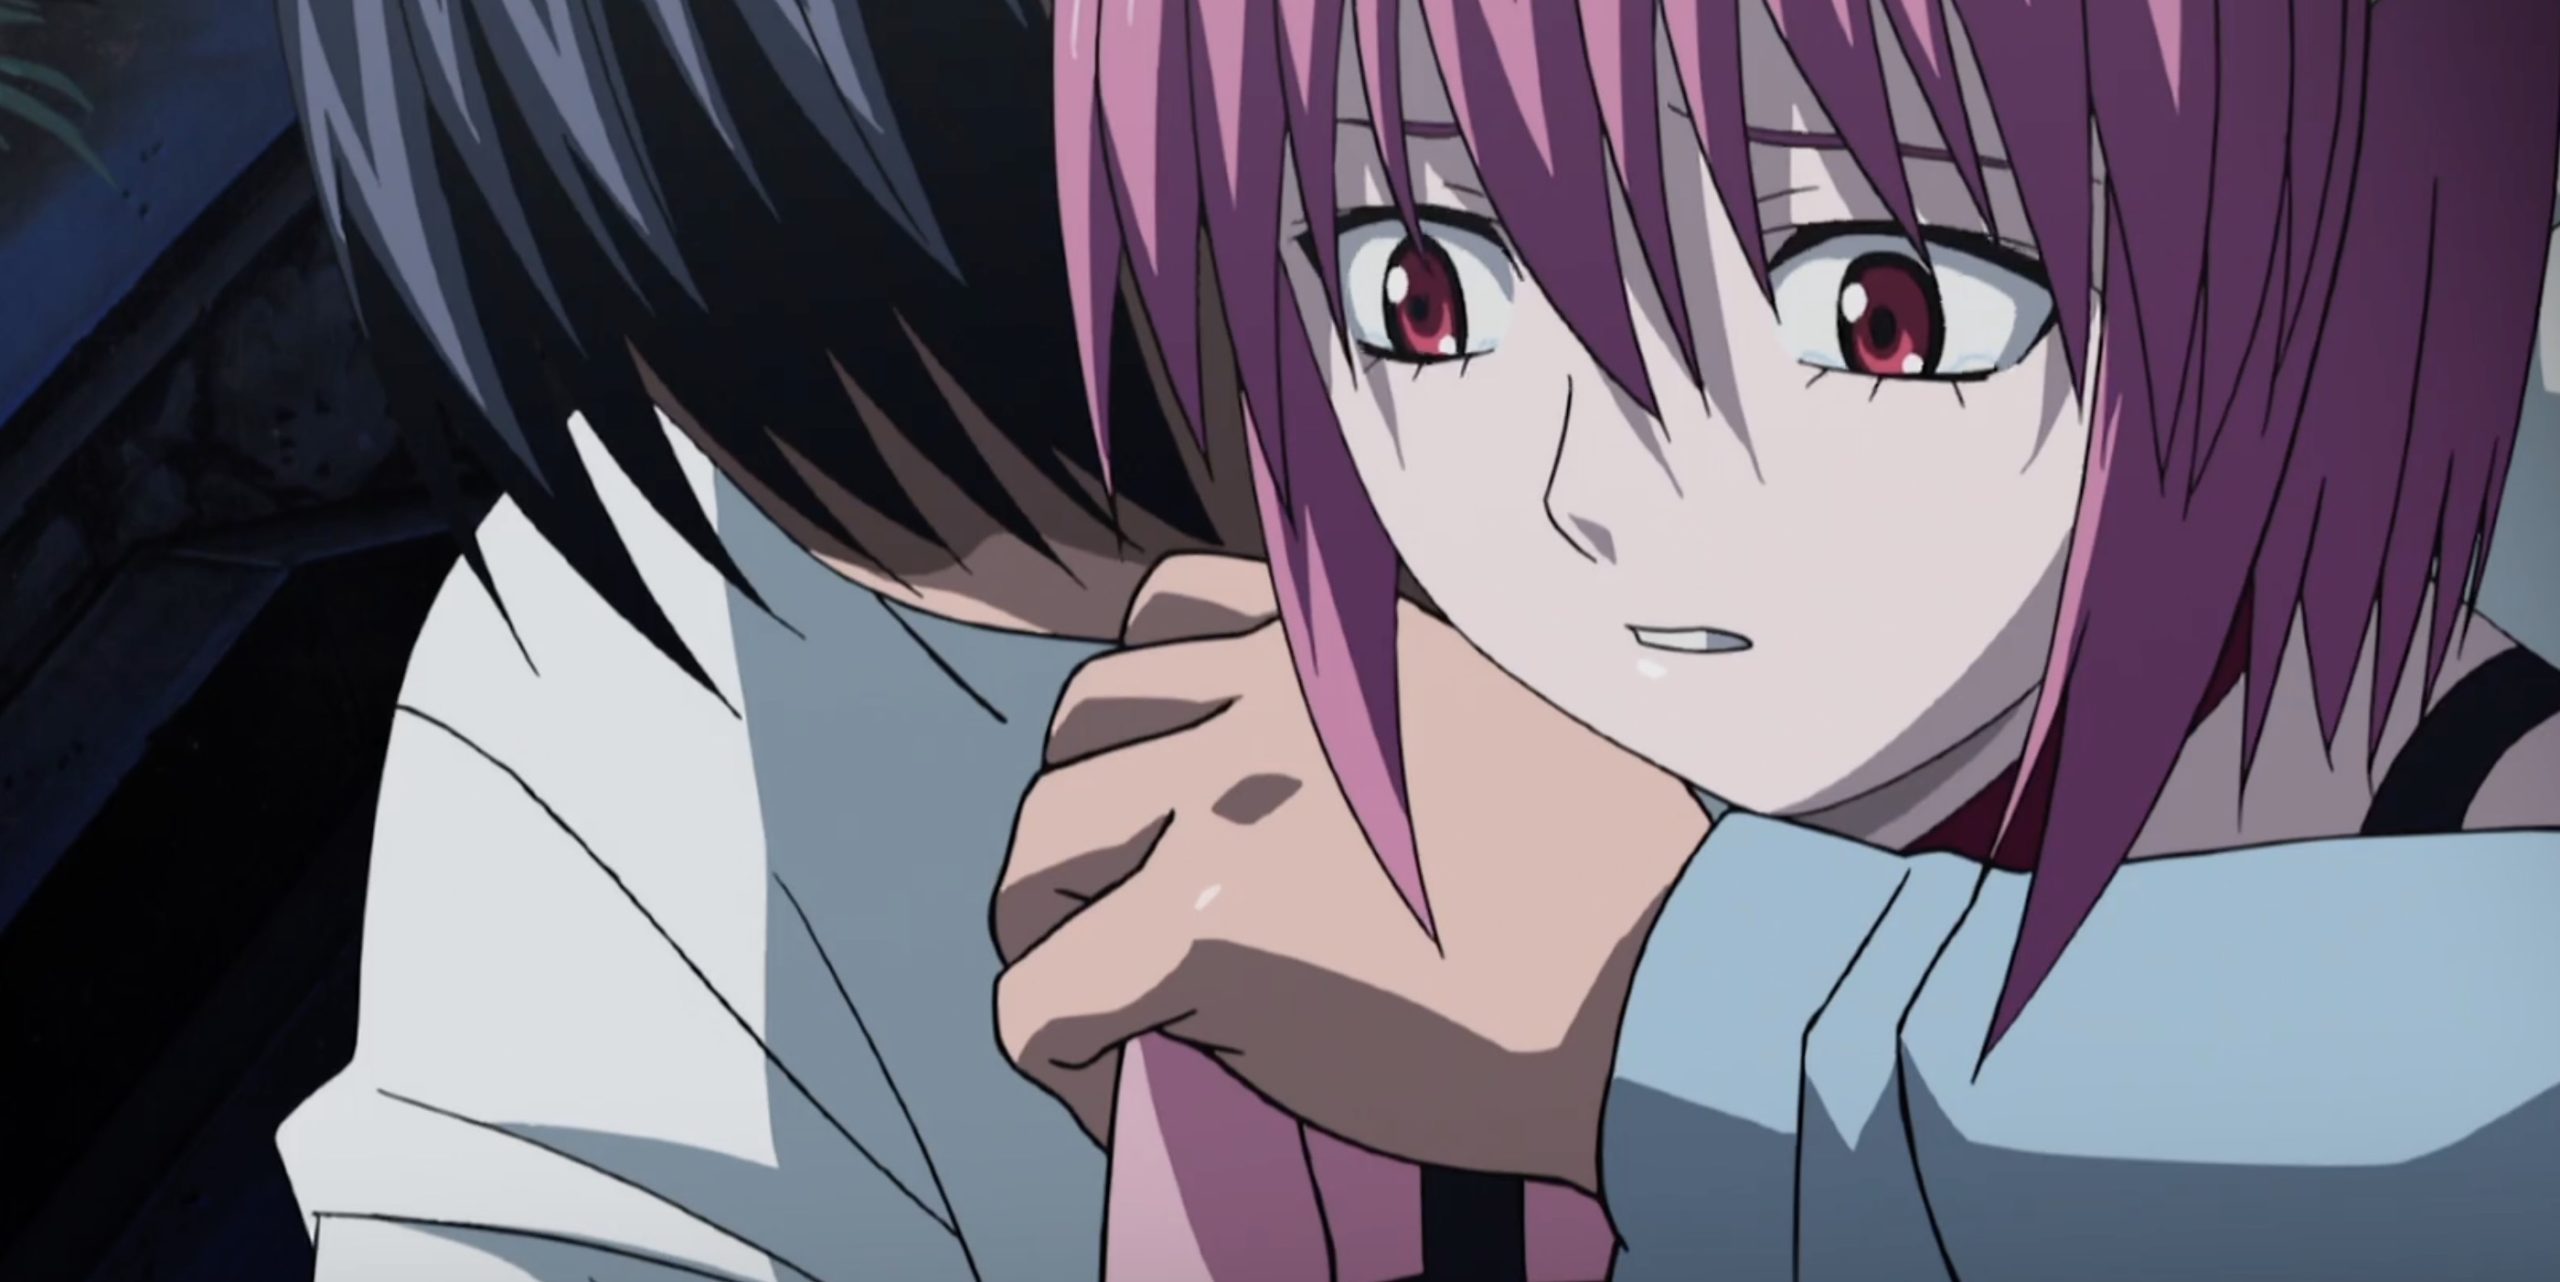 1707827670 908 The Real Reason Why Fans Hate The Elfen Lied Anime